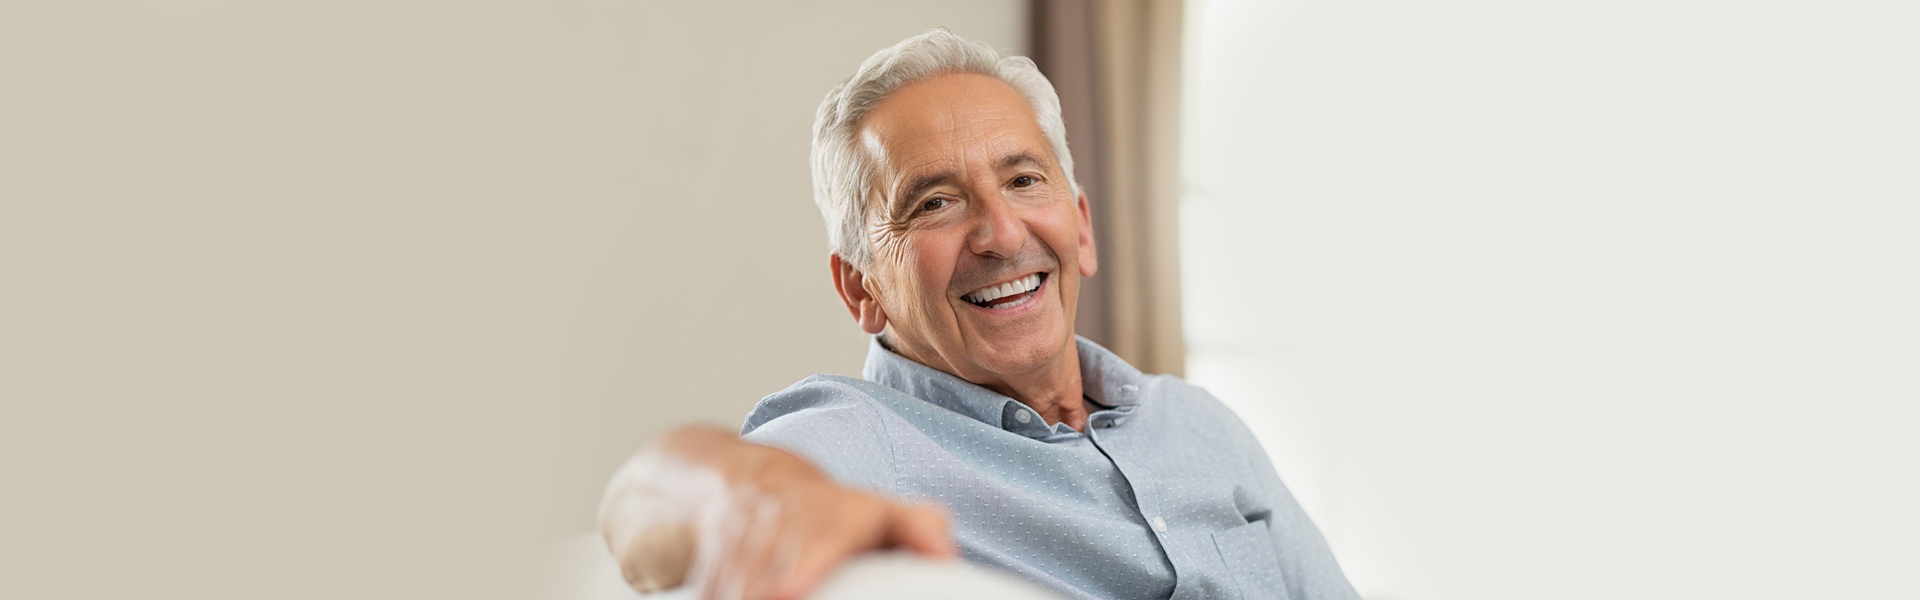 Timeless Smiles: Is There a Deadline for Dental Implants?